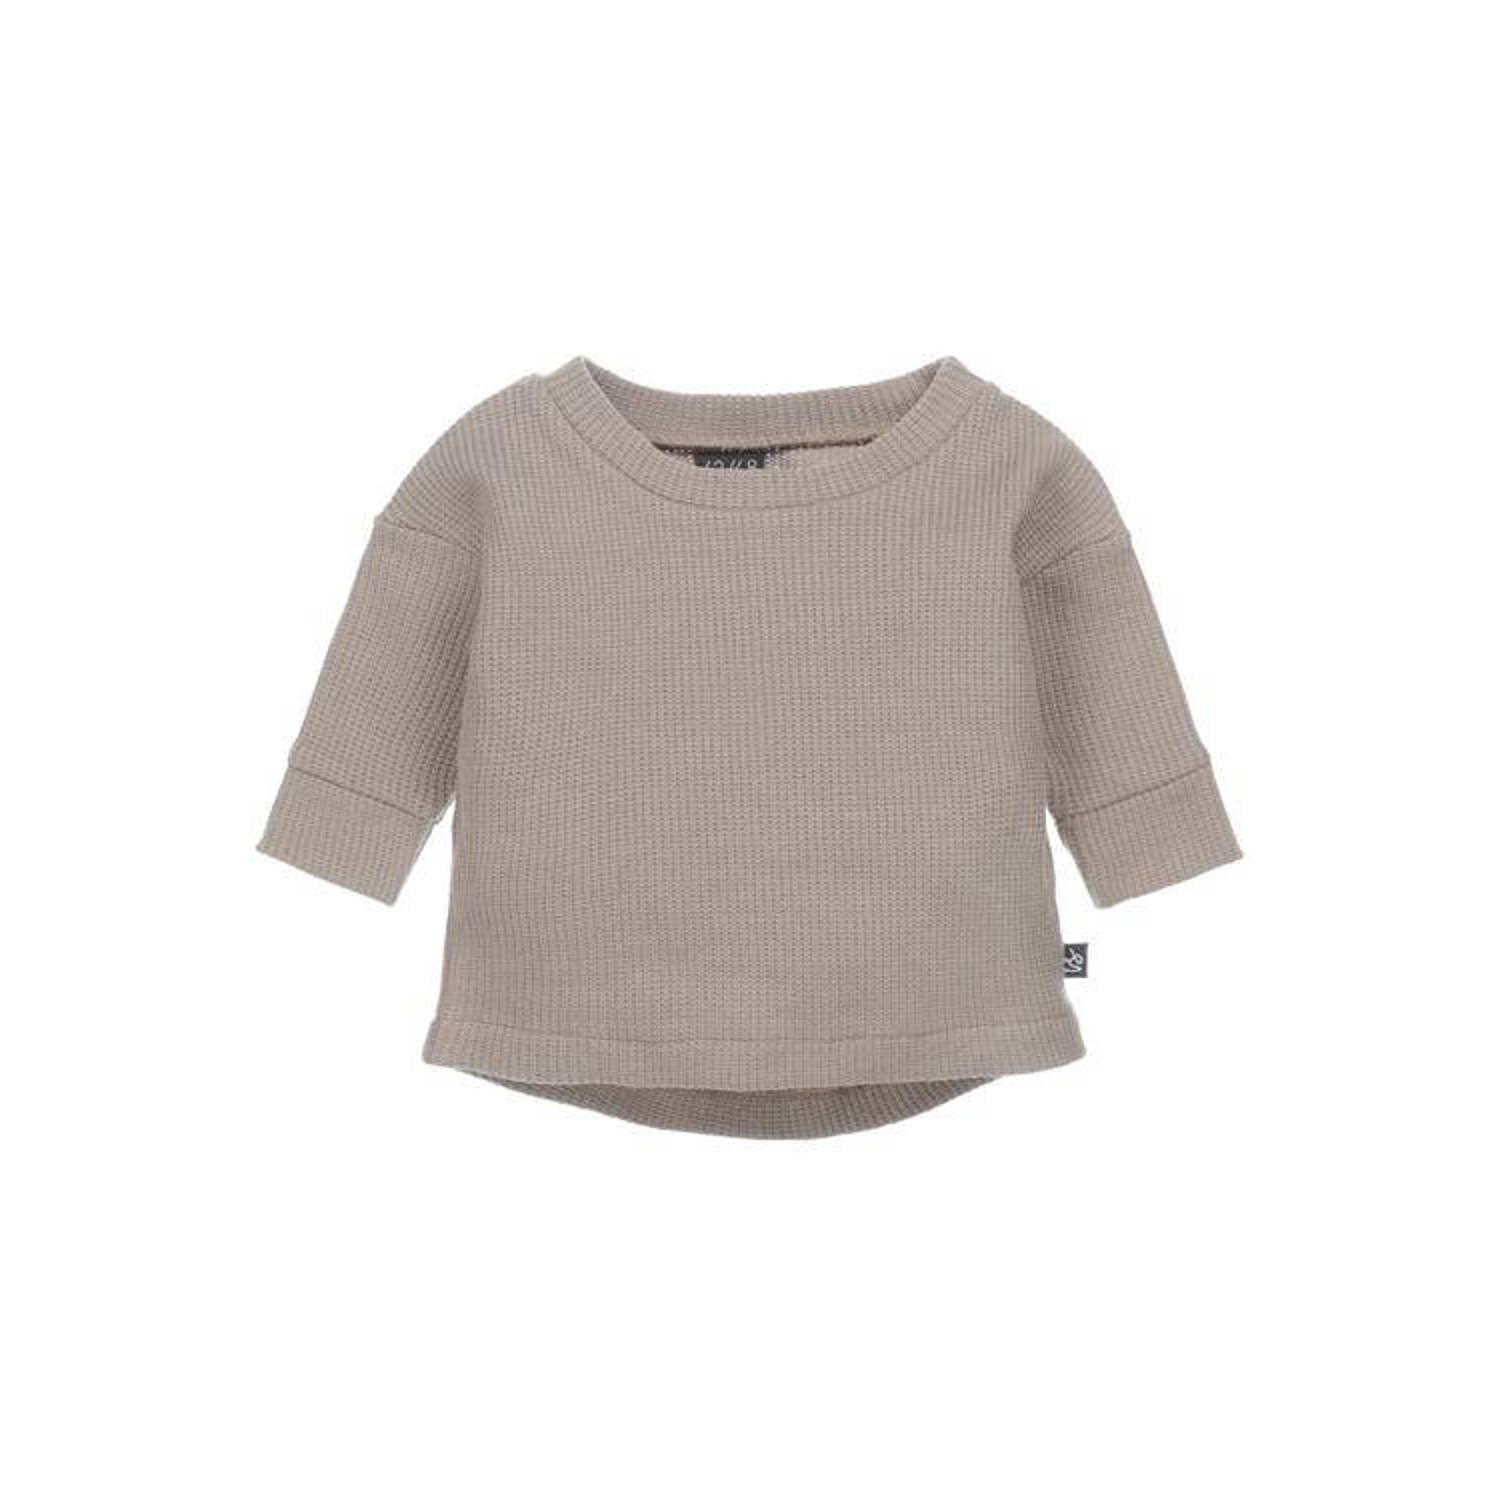 Babystyling baby sweater bruin